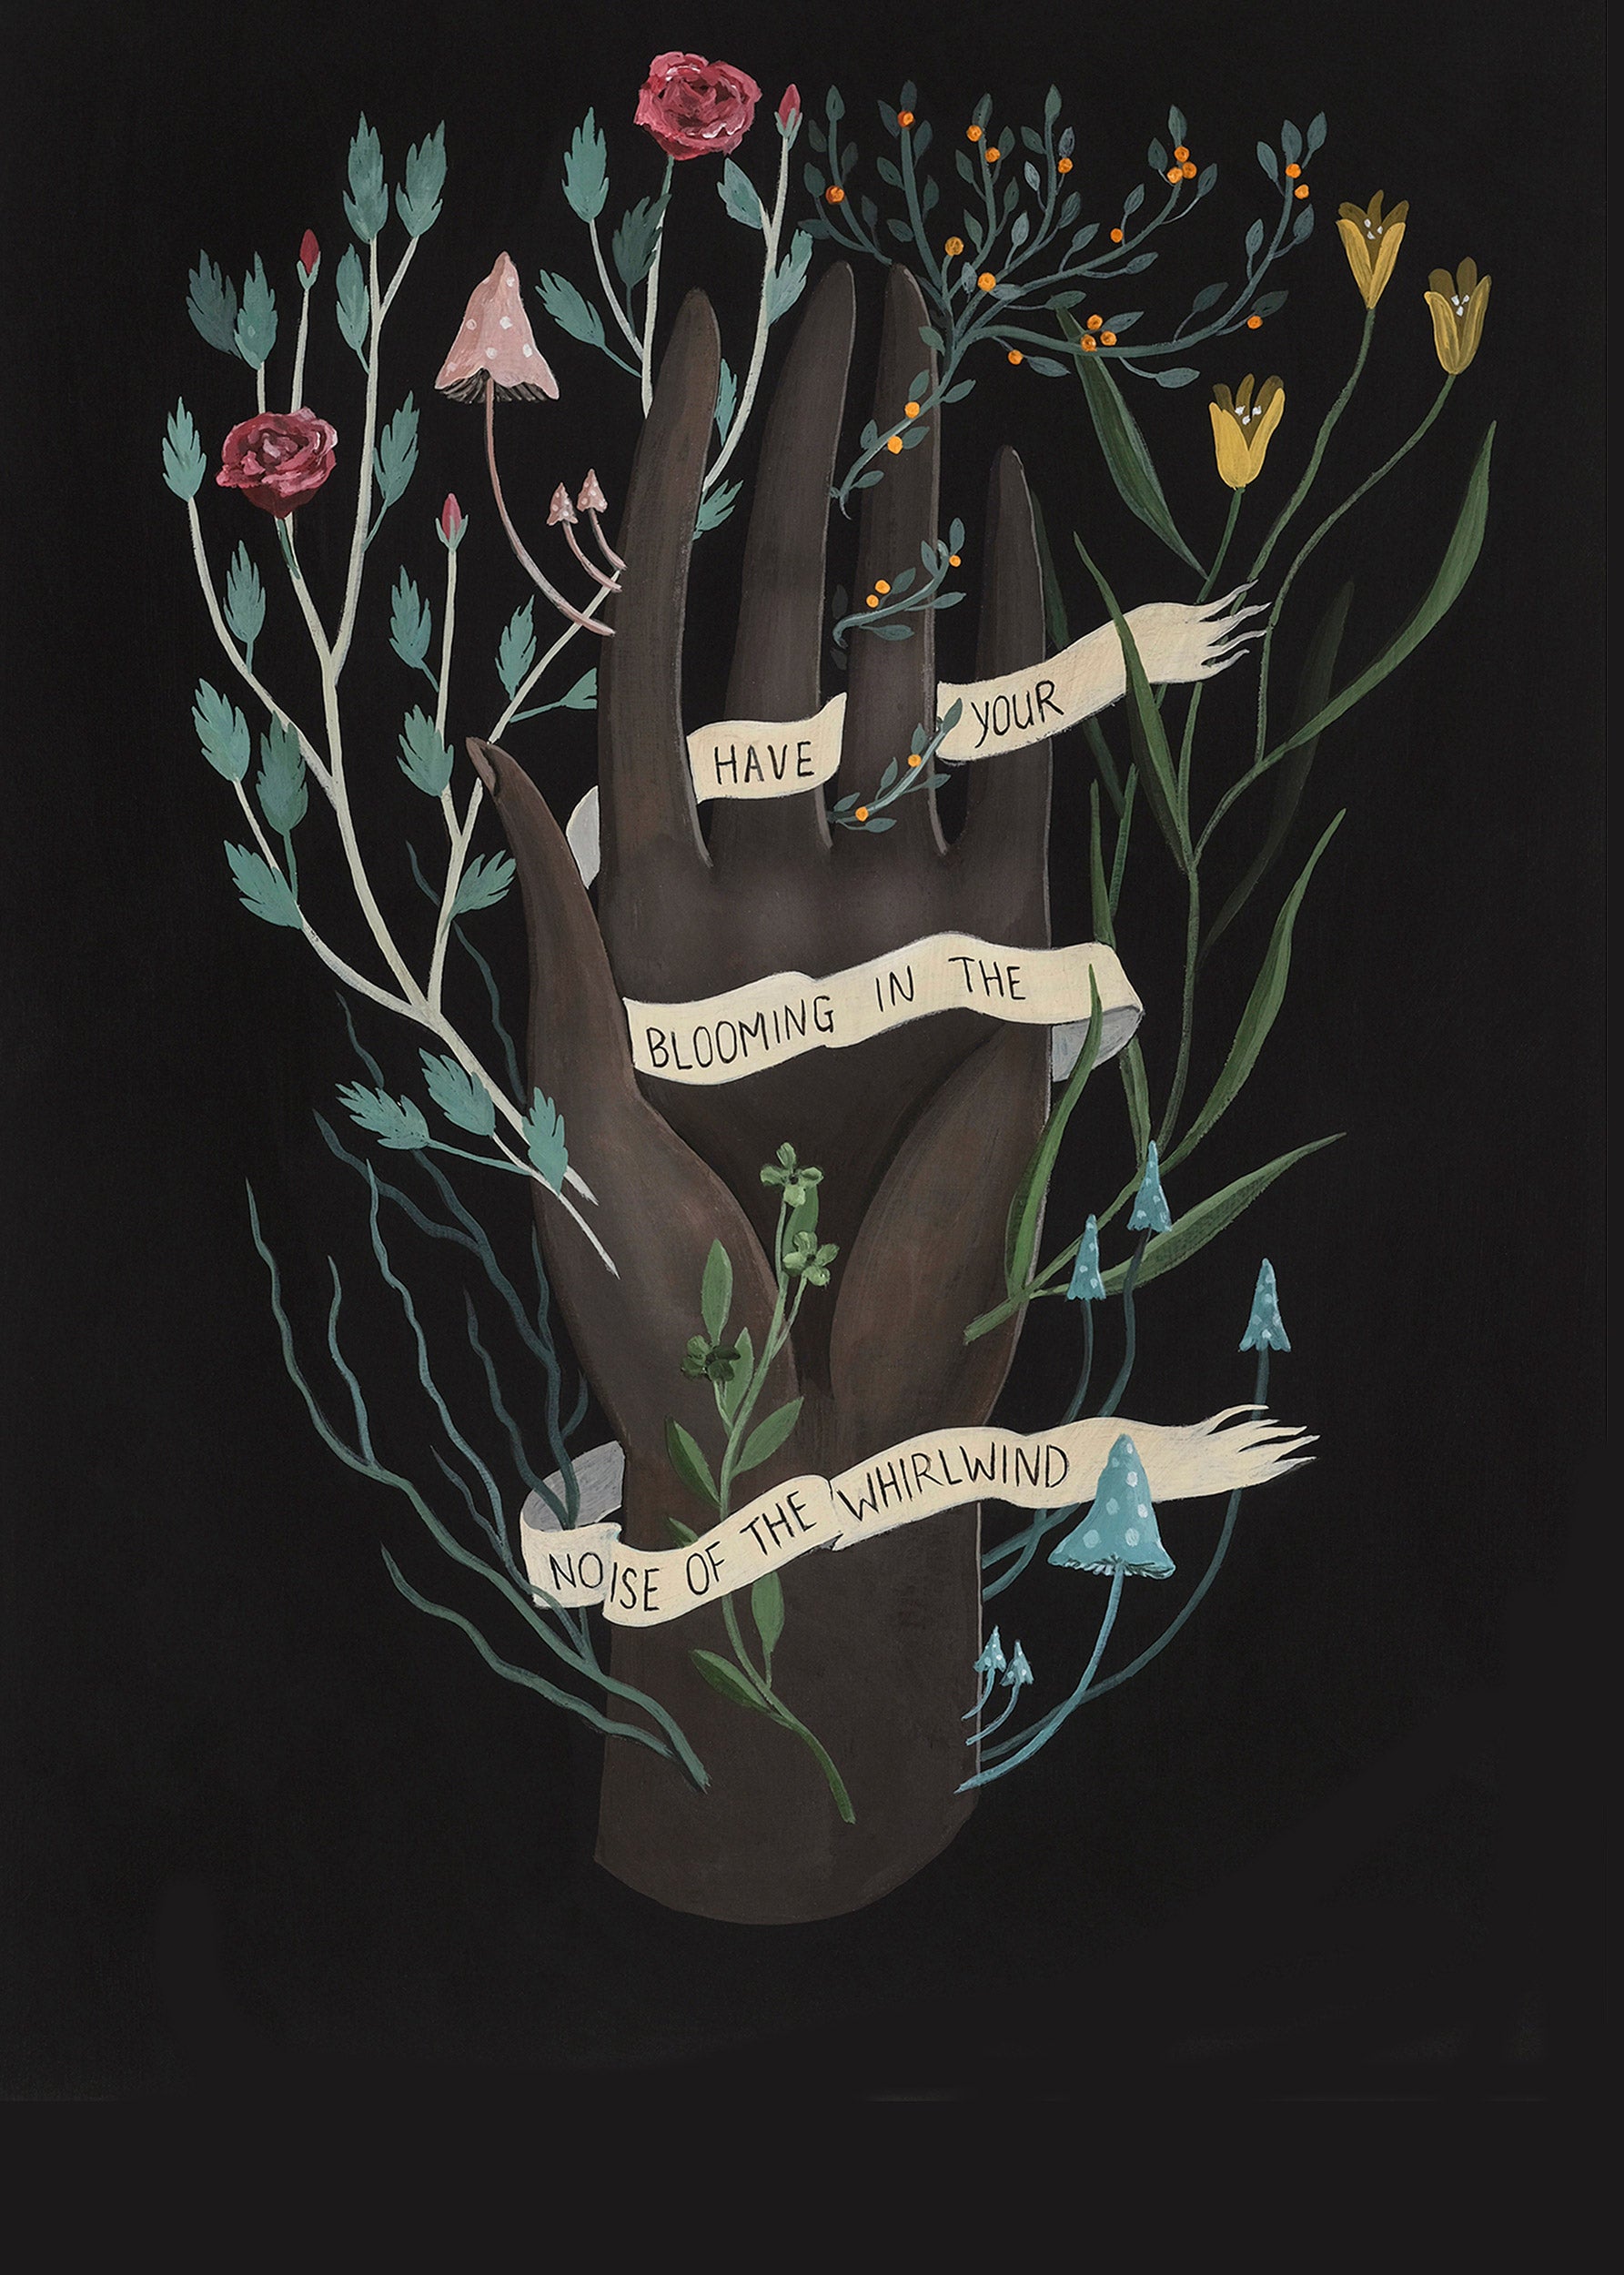 Illustration of tree forming a hand draped in banner that says "Have your blooming in the noise of the whirlwind."